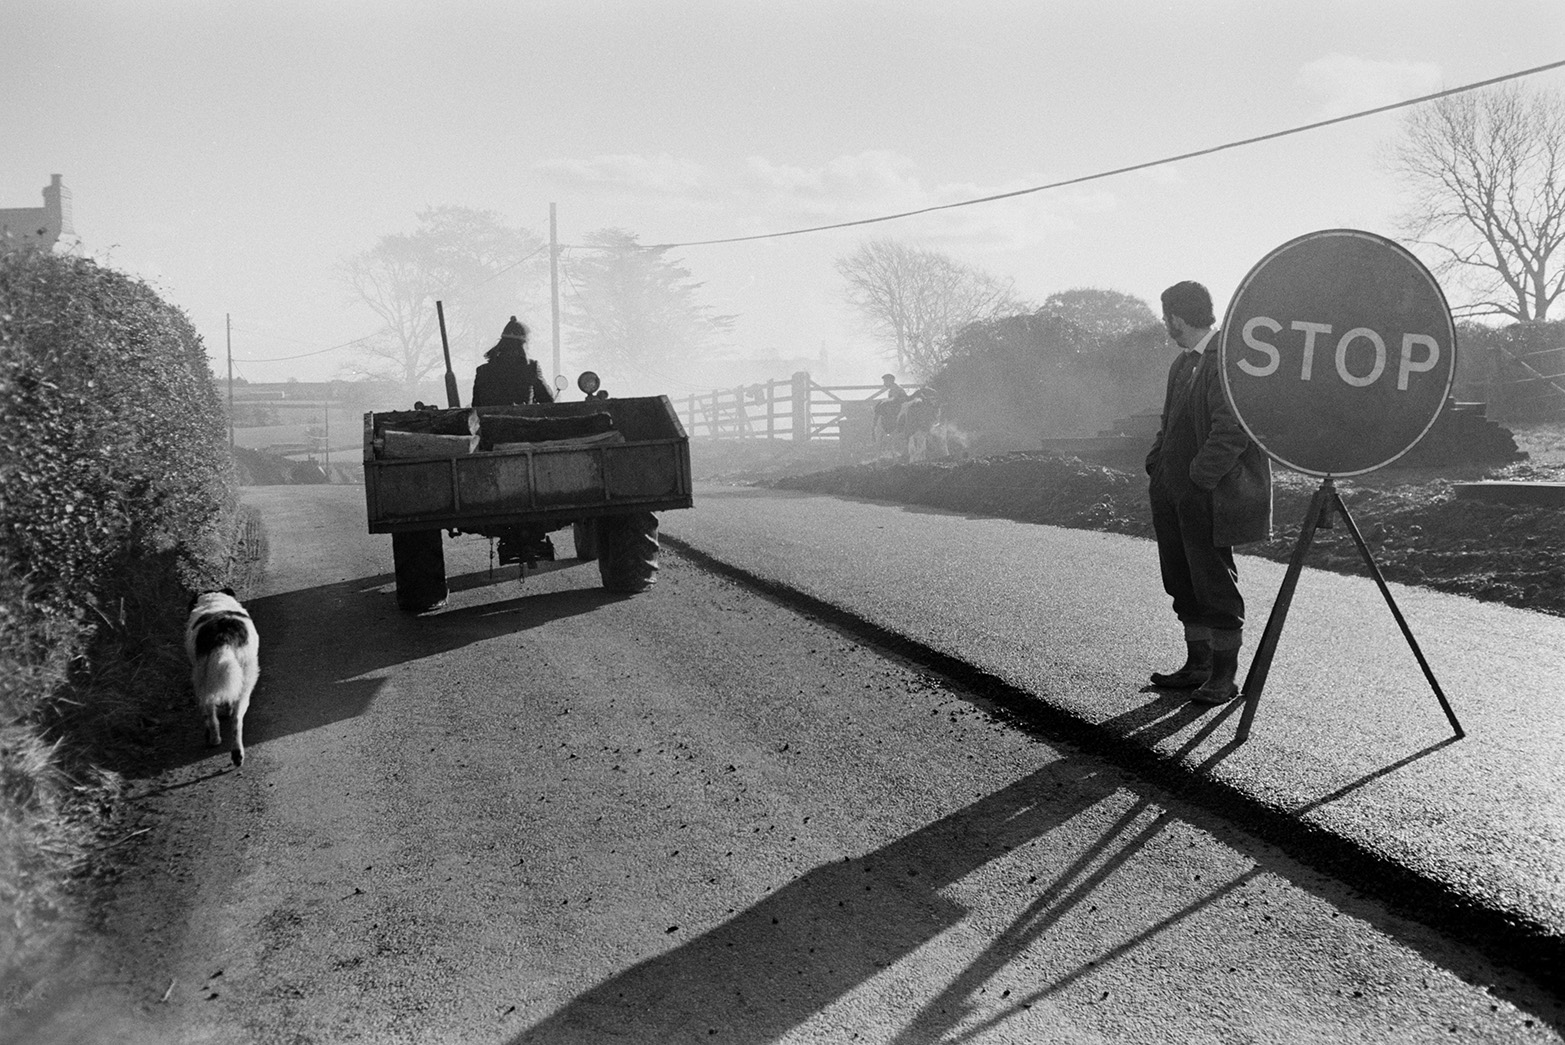 Derek Bright driving a tractor and link box down a road which is bring resurfaced in Beaford, past a man holding a 'stop' sign. A dog is following the tractor.